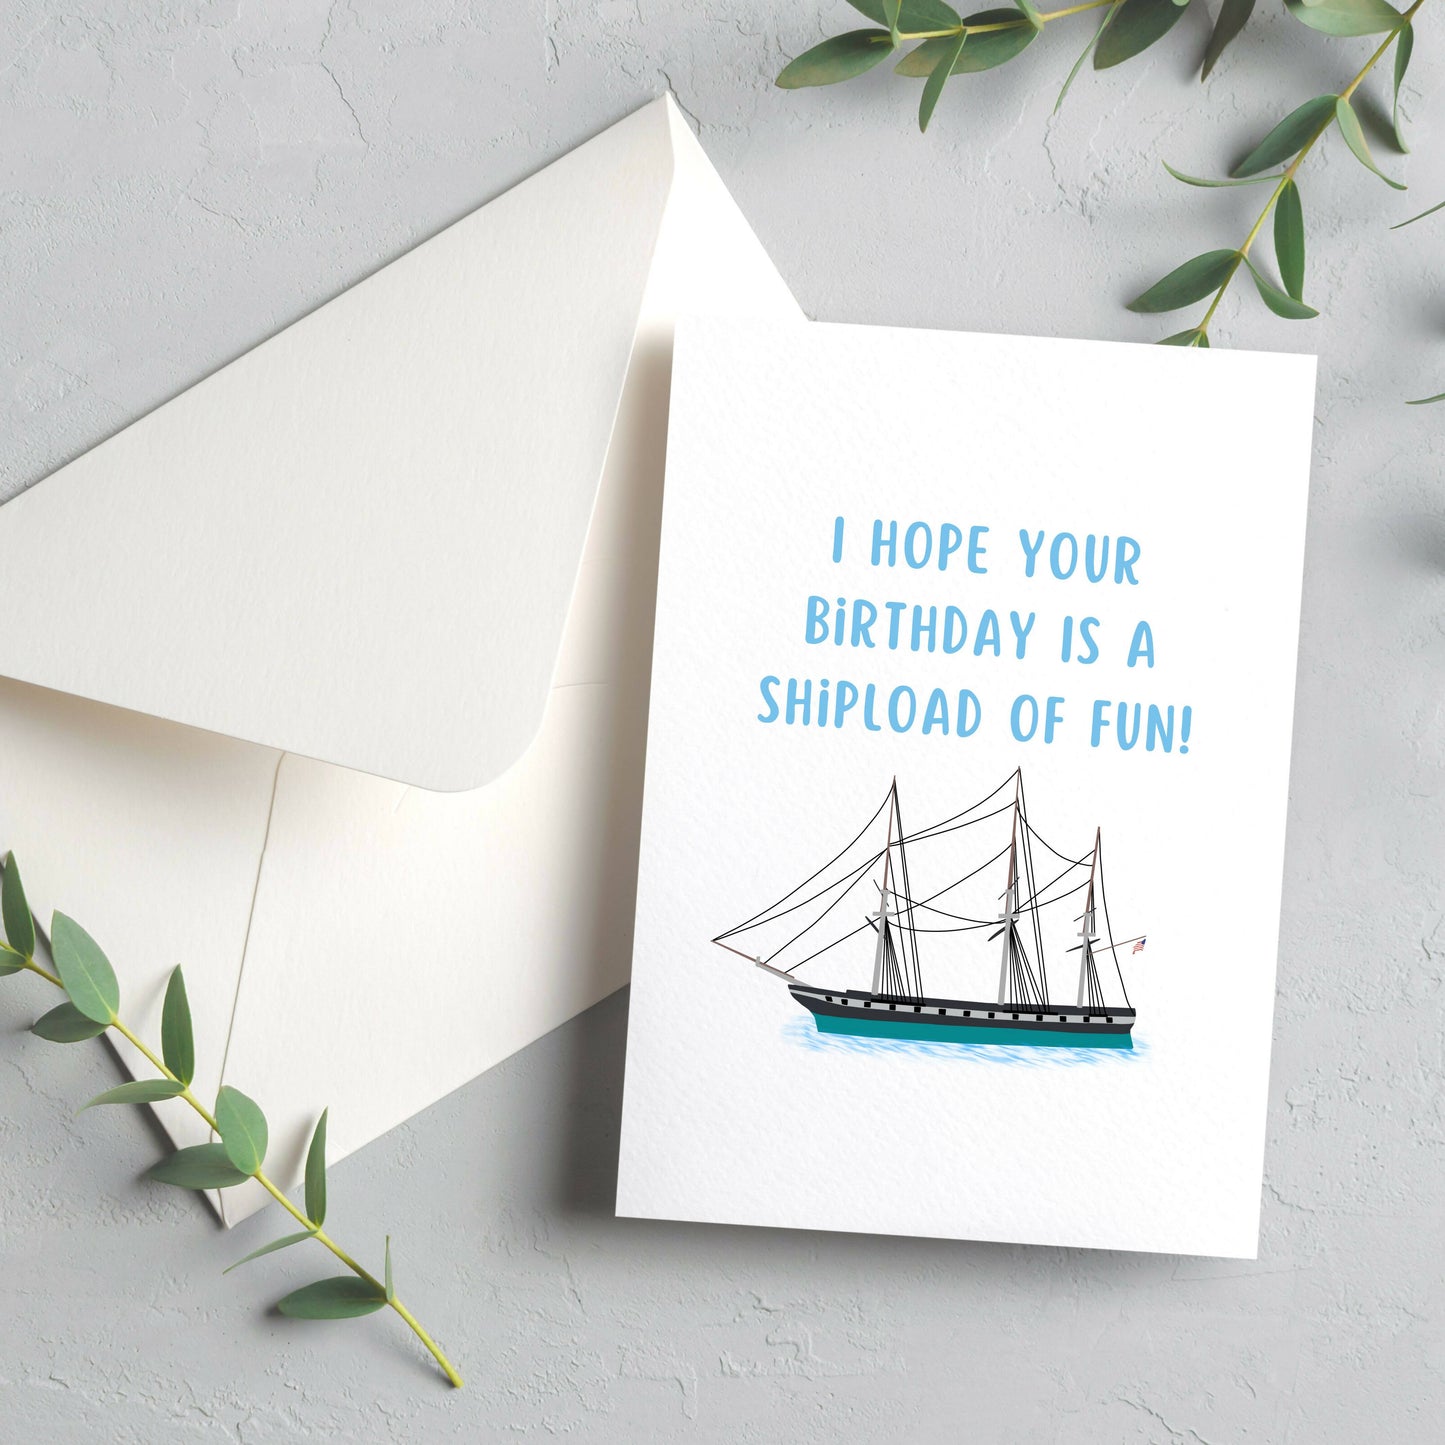 Load image into Gallery viewer, Shipload of Fun Birthday Card
